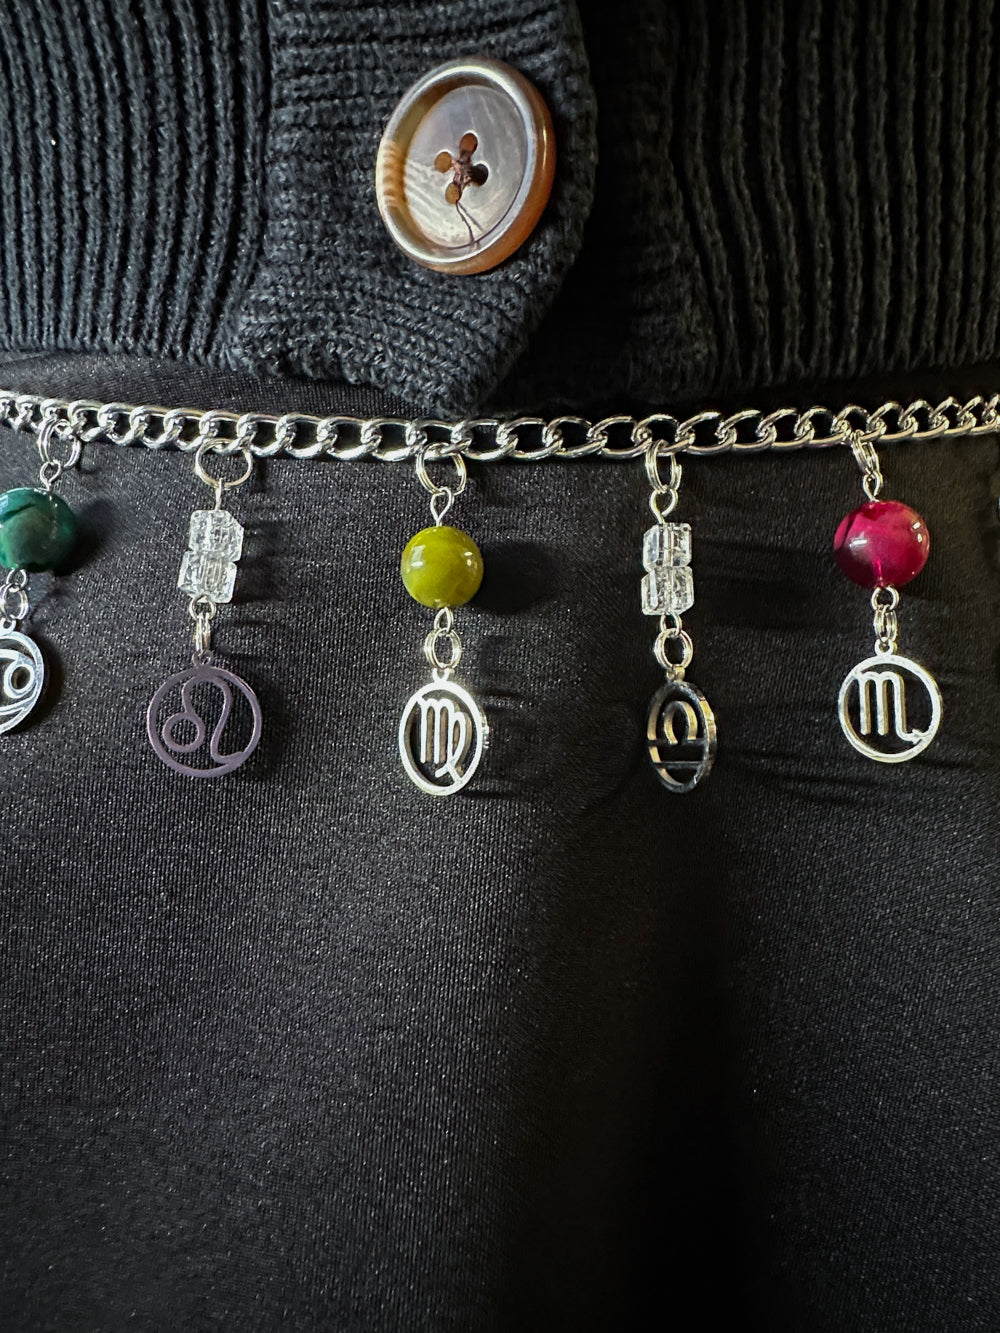 the cancer charmed chain belt